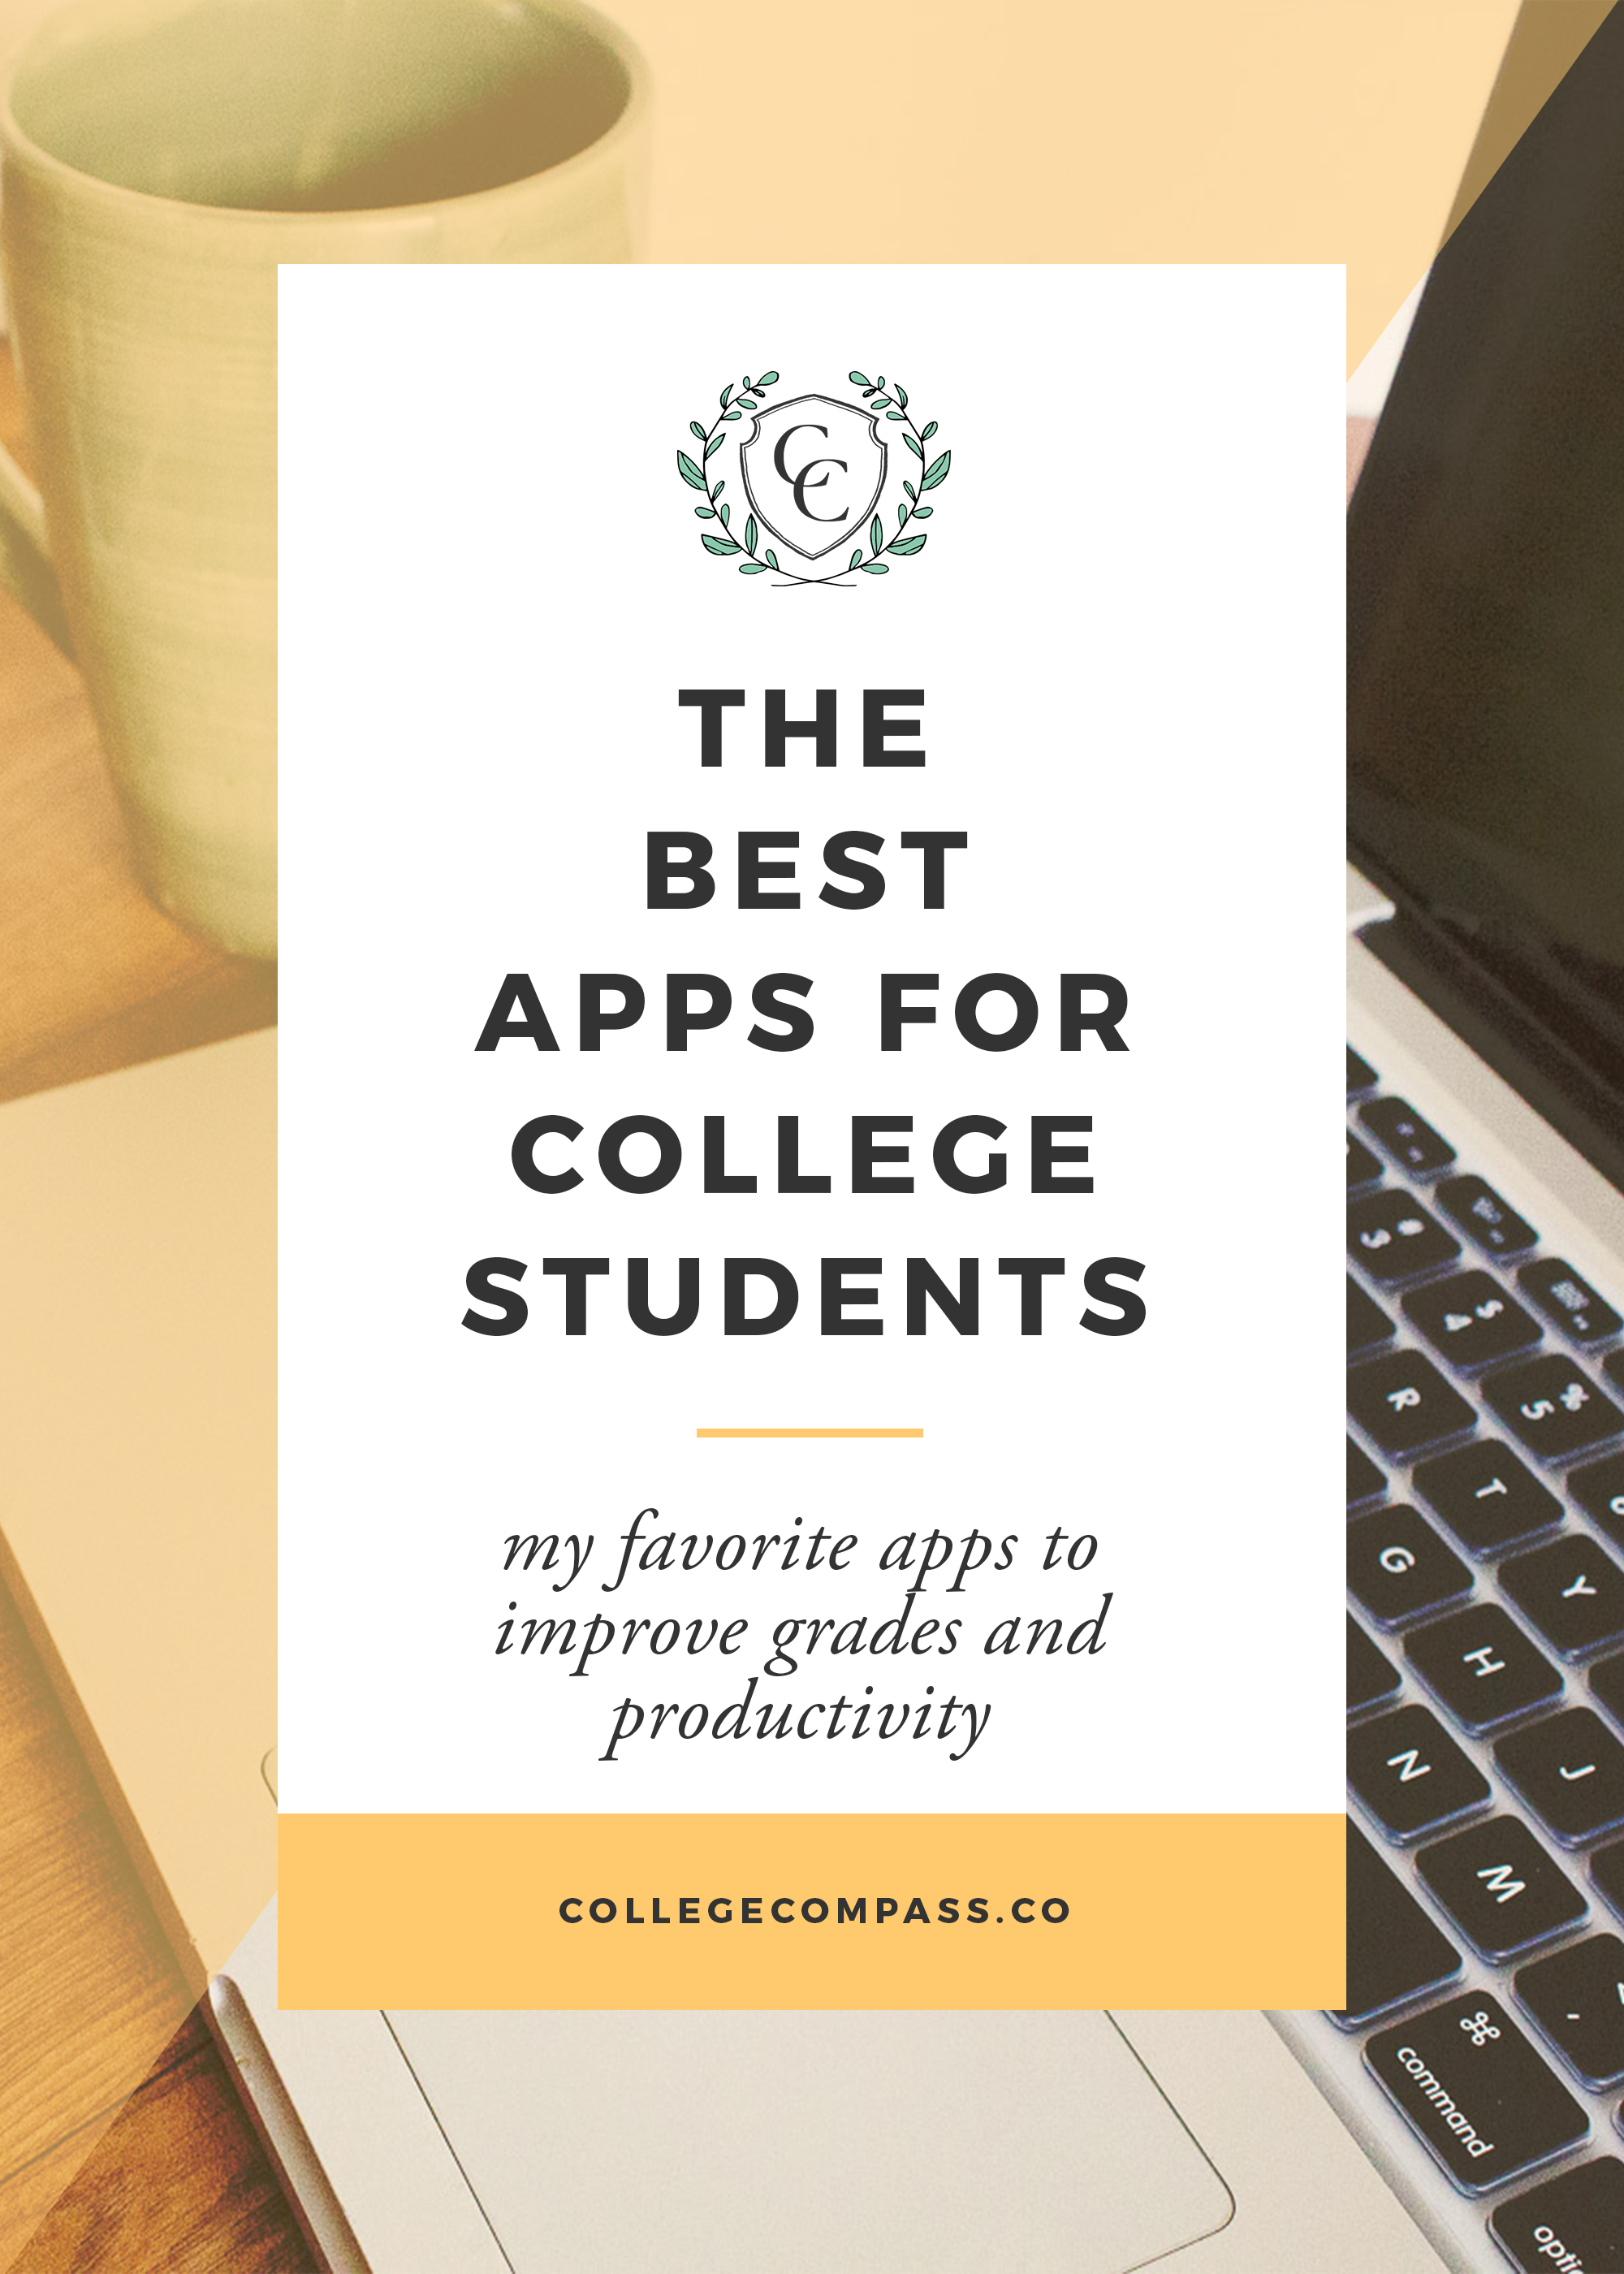 The Best Apps for College Students